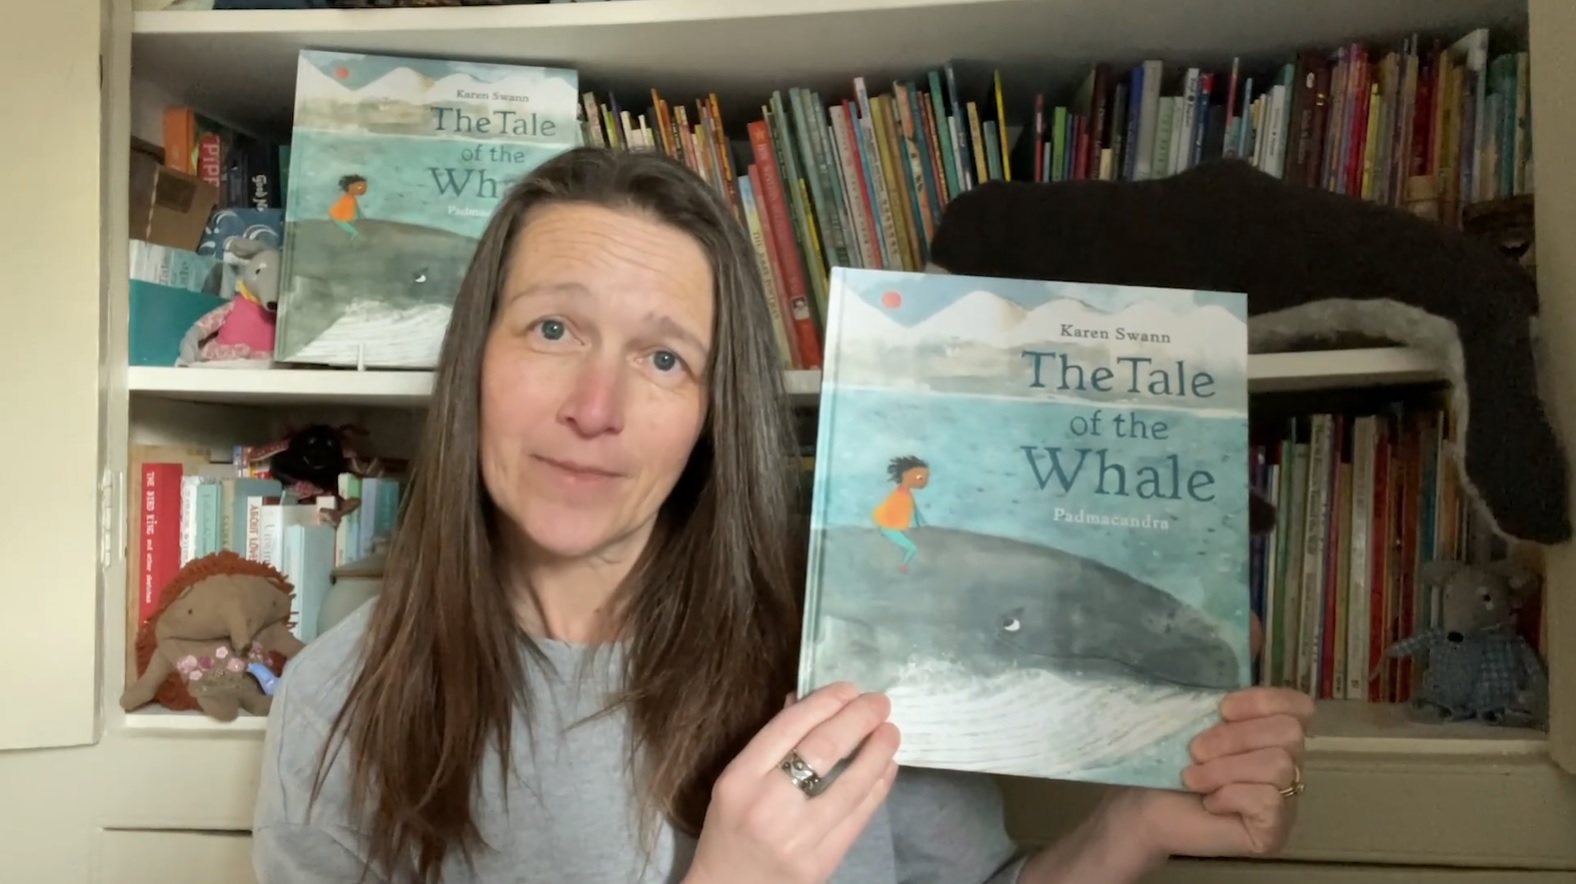 The Tale of the Whale introduced by Karen Swann